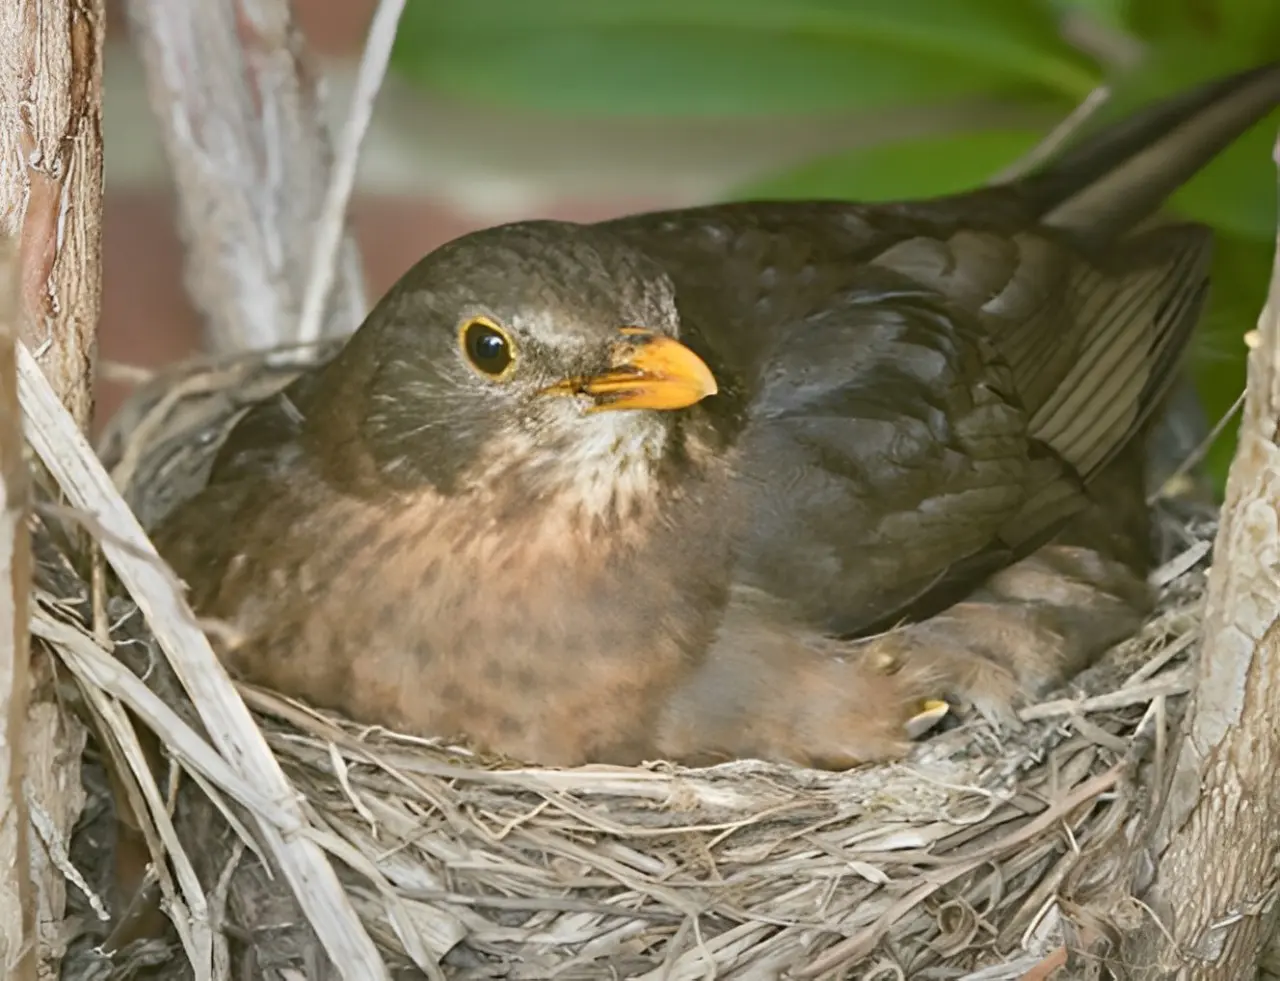 A bird sitting in its nest on the ground.